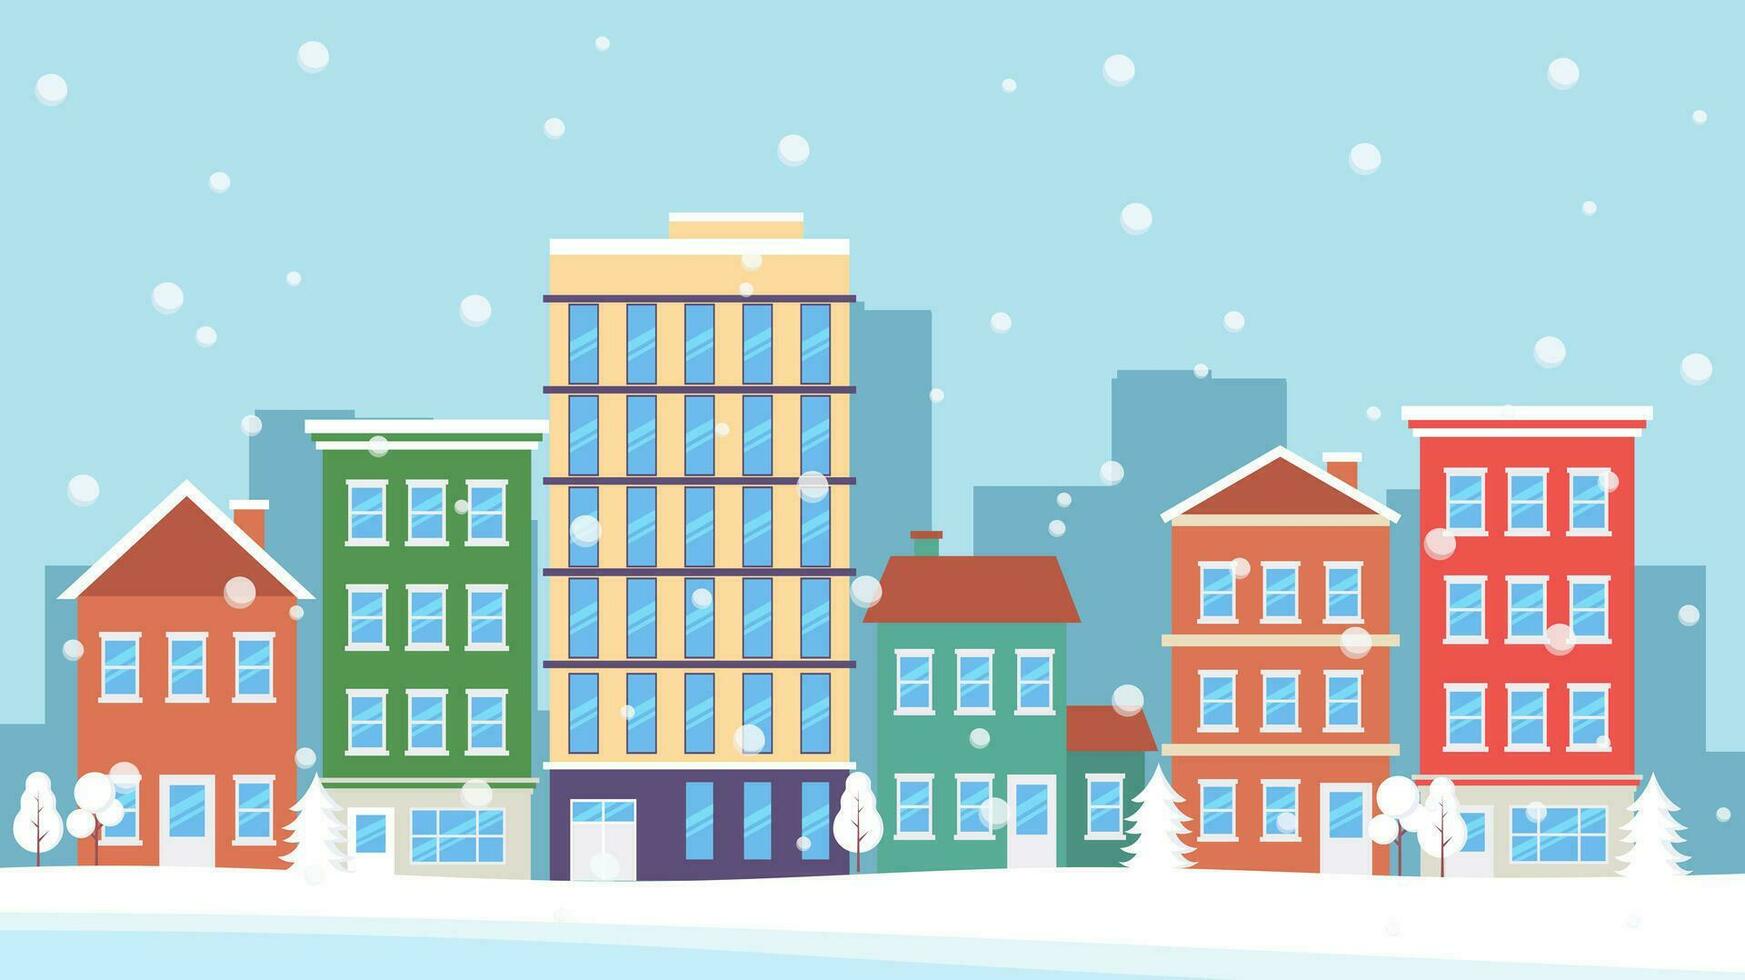 Beautiful winter townscape with colorful houses, buildings, and trees. wallpaper with a snow theme. Vector illustration in flat style. Suitable as a banner, postcard, or template